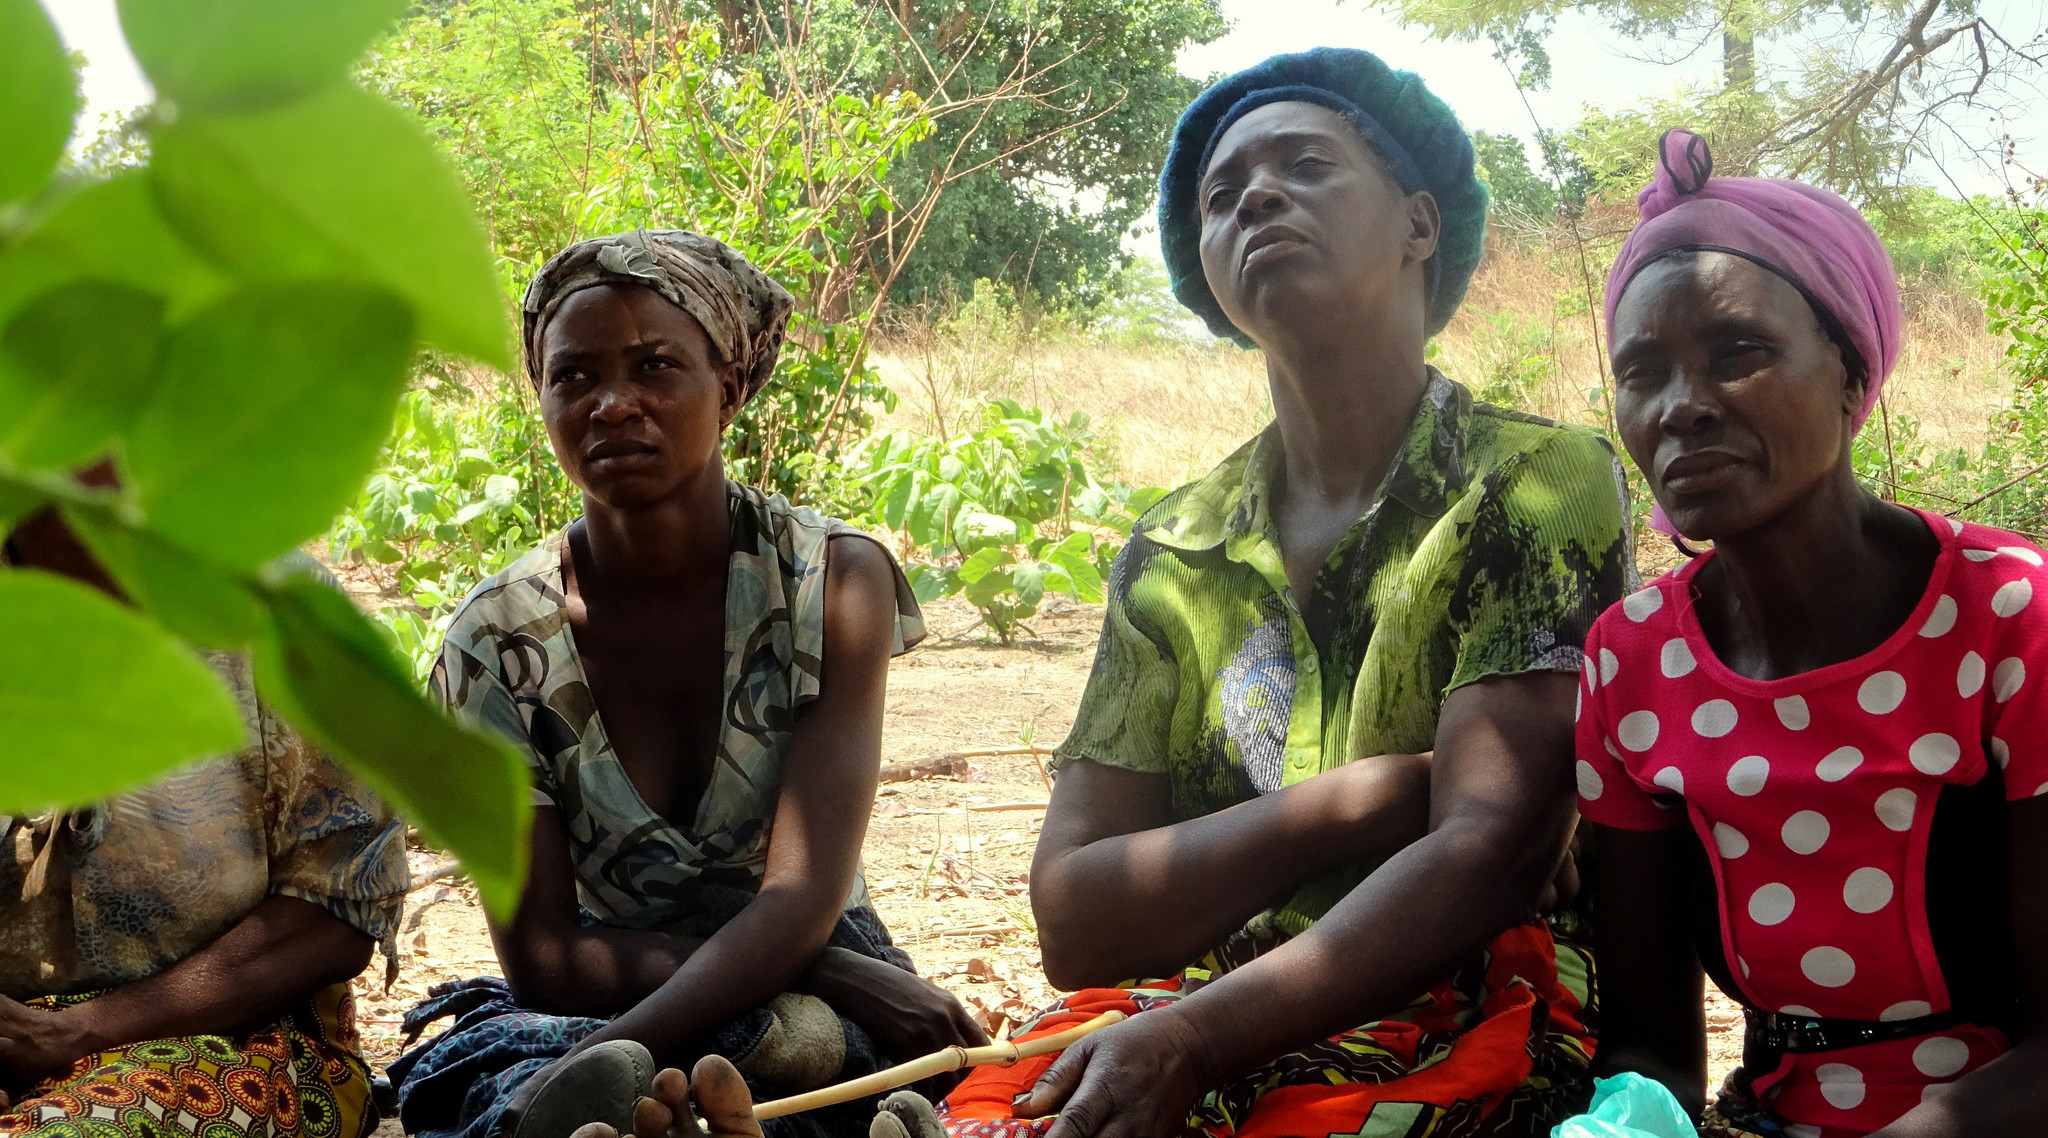 In Katanino, marginalised and vulnerable groups, and particularly women, are typically the primary users of natural resources. The project has a strategy to engage with these groups and ensure that they are represented and can participate meaningfully. © WeForest